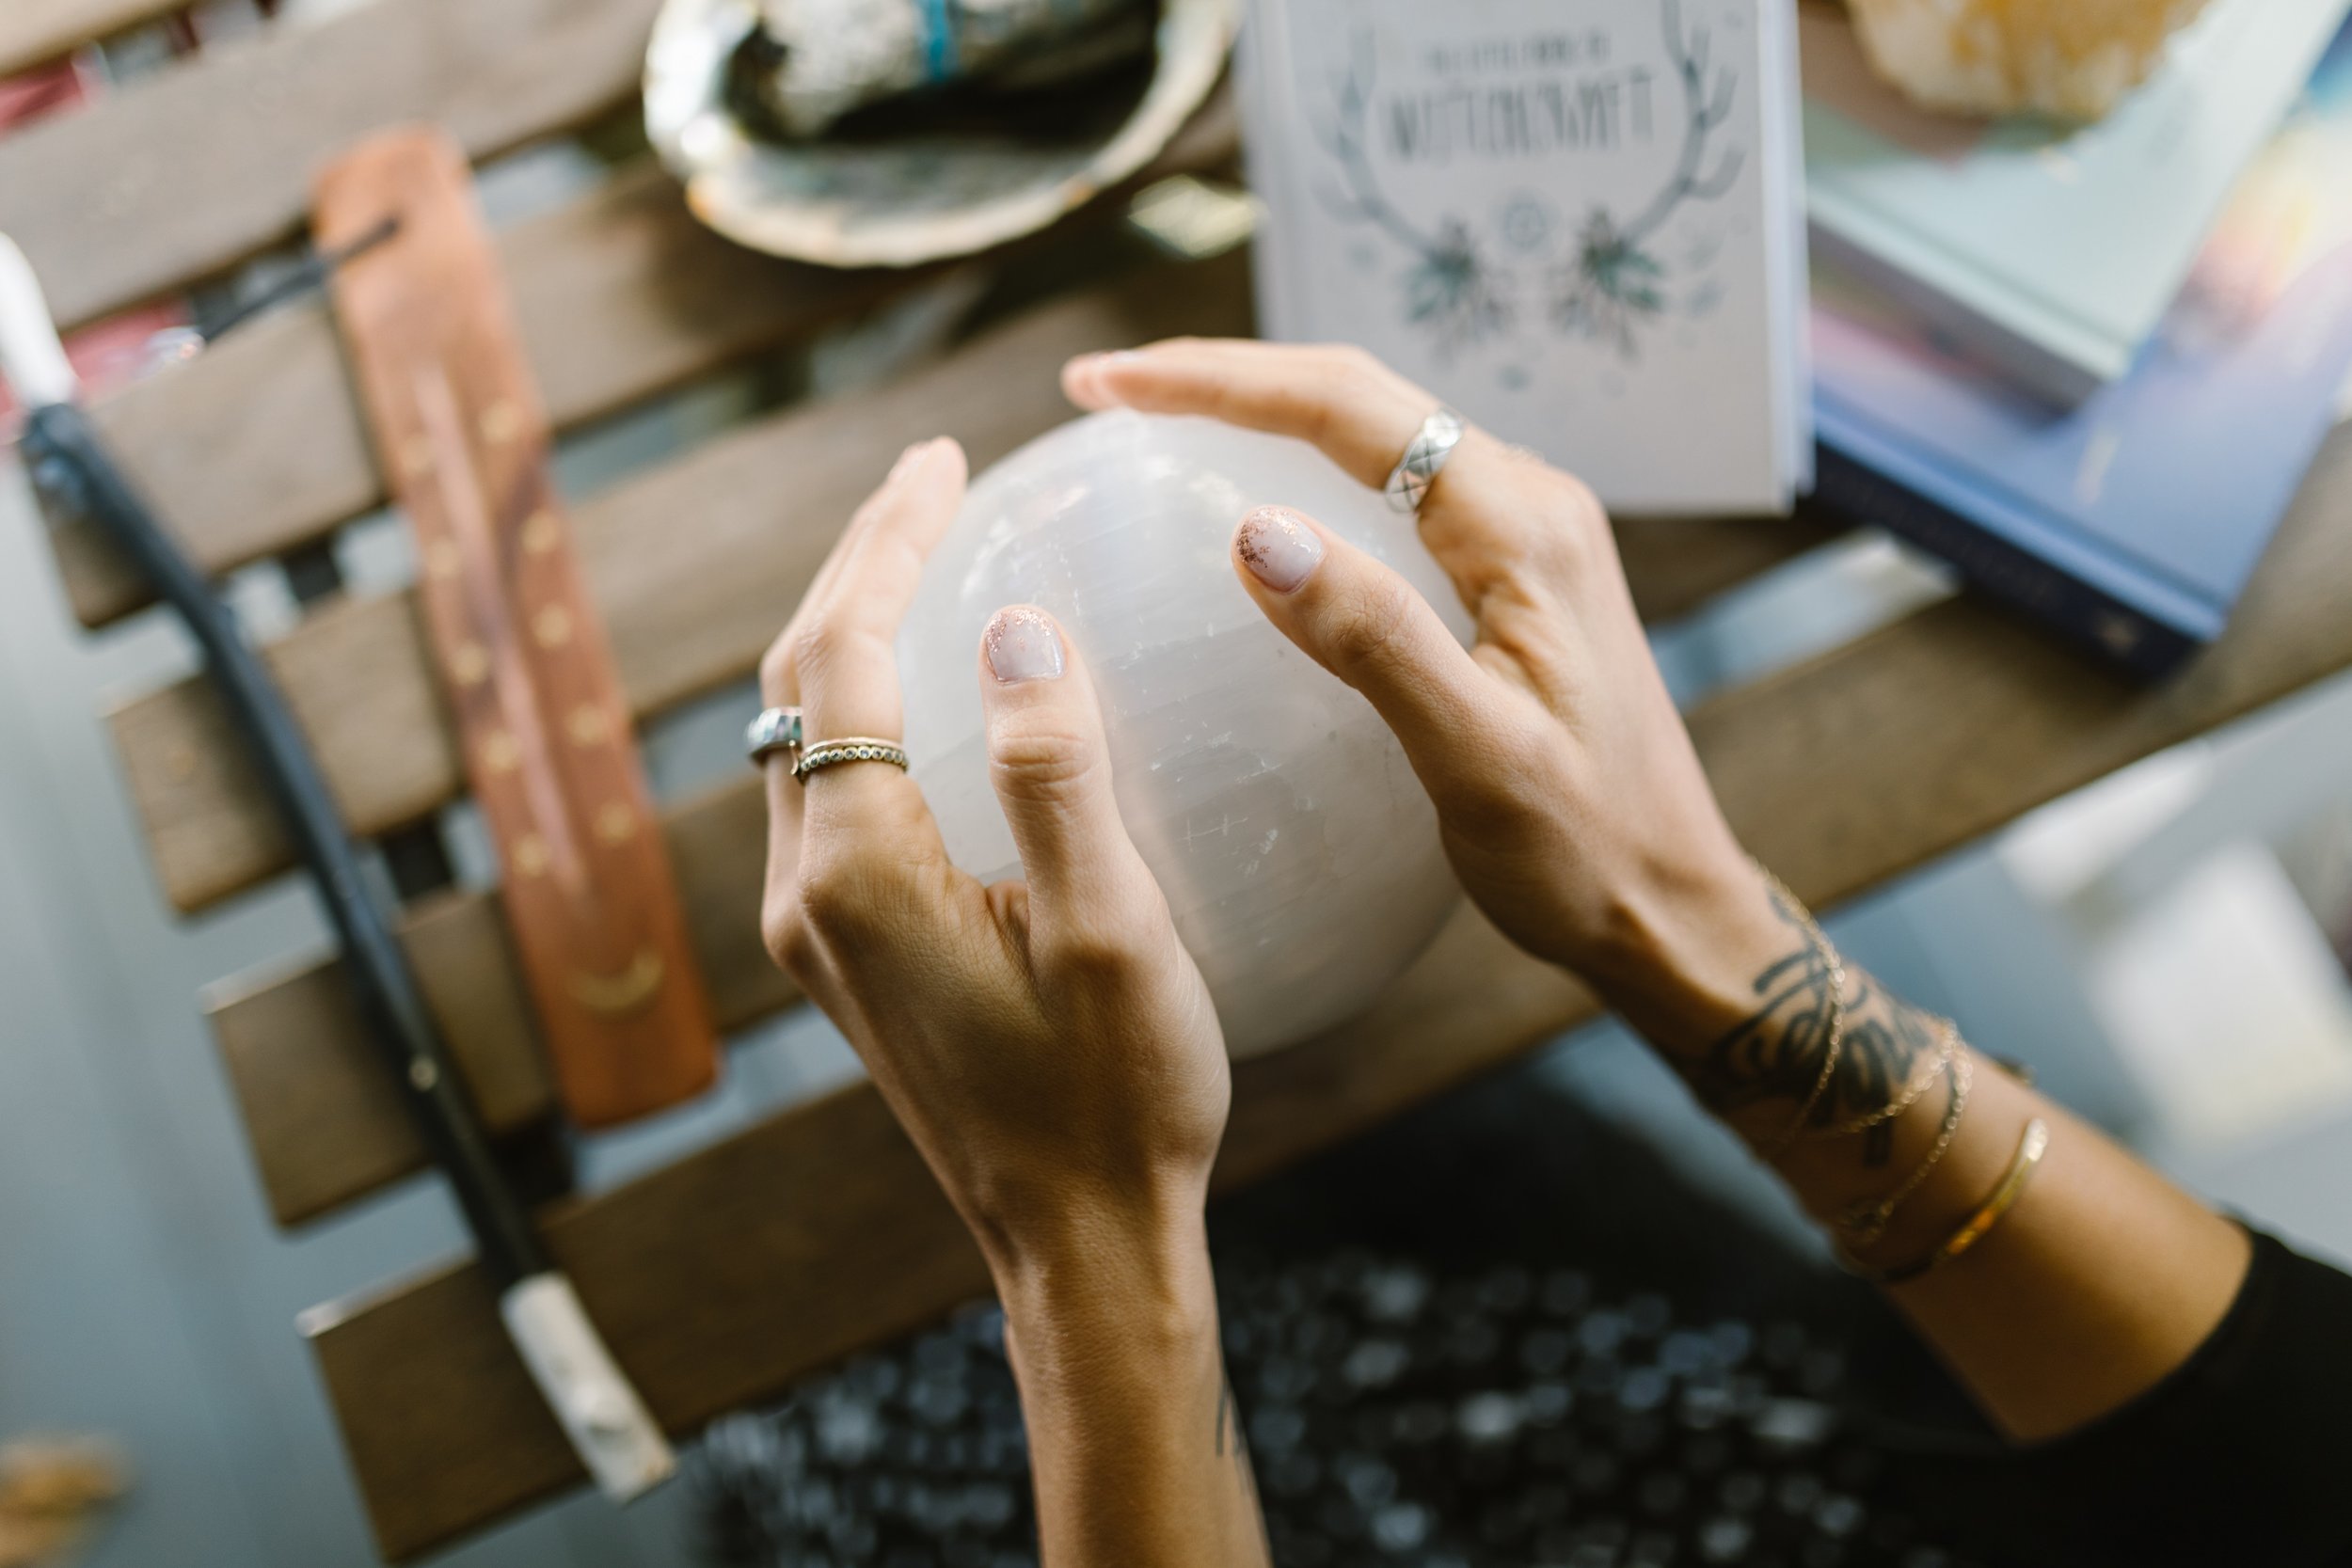 a woman's hands holding onto a crystal ball while she practices mediumship development. The ball is sitting on a wooden table with various spiritual objects like books and incense.